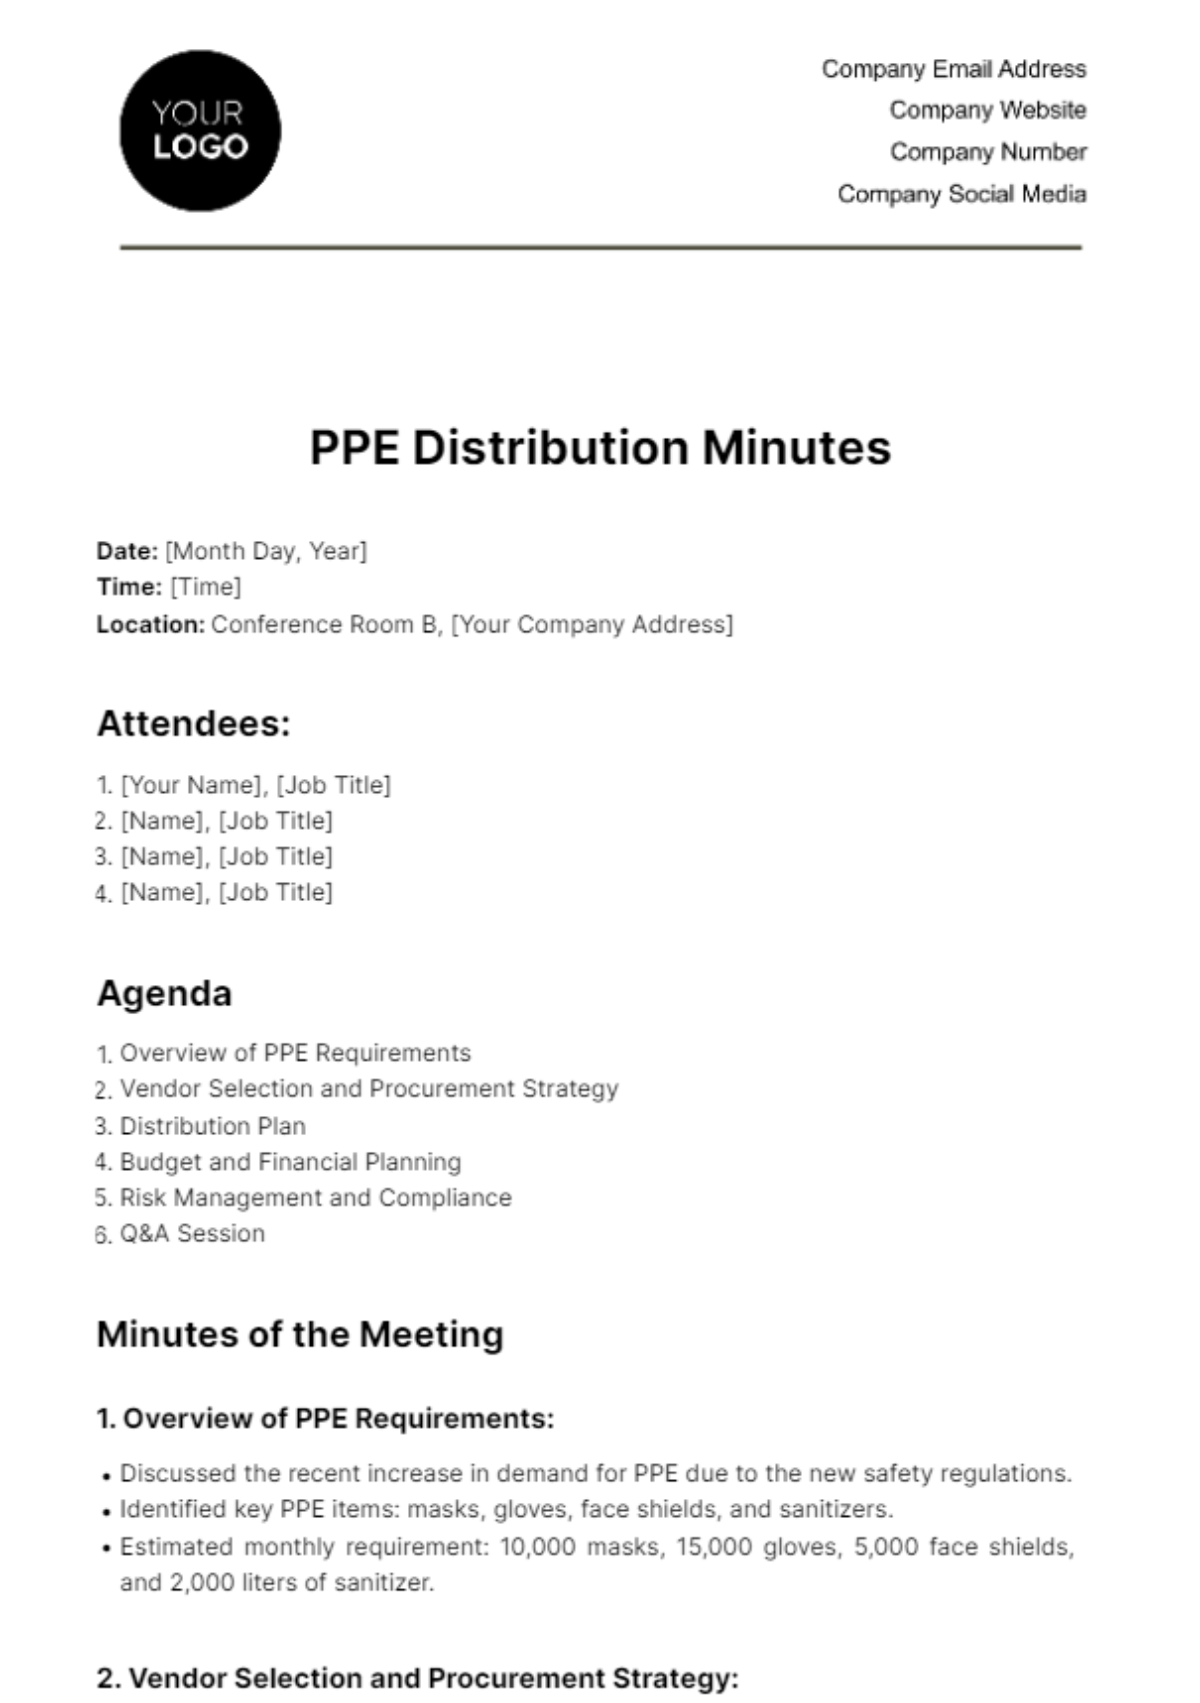 PPE Distribution Minutes Template